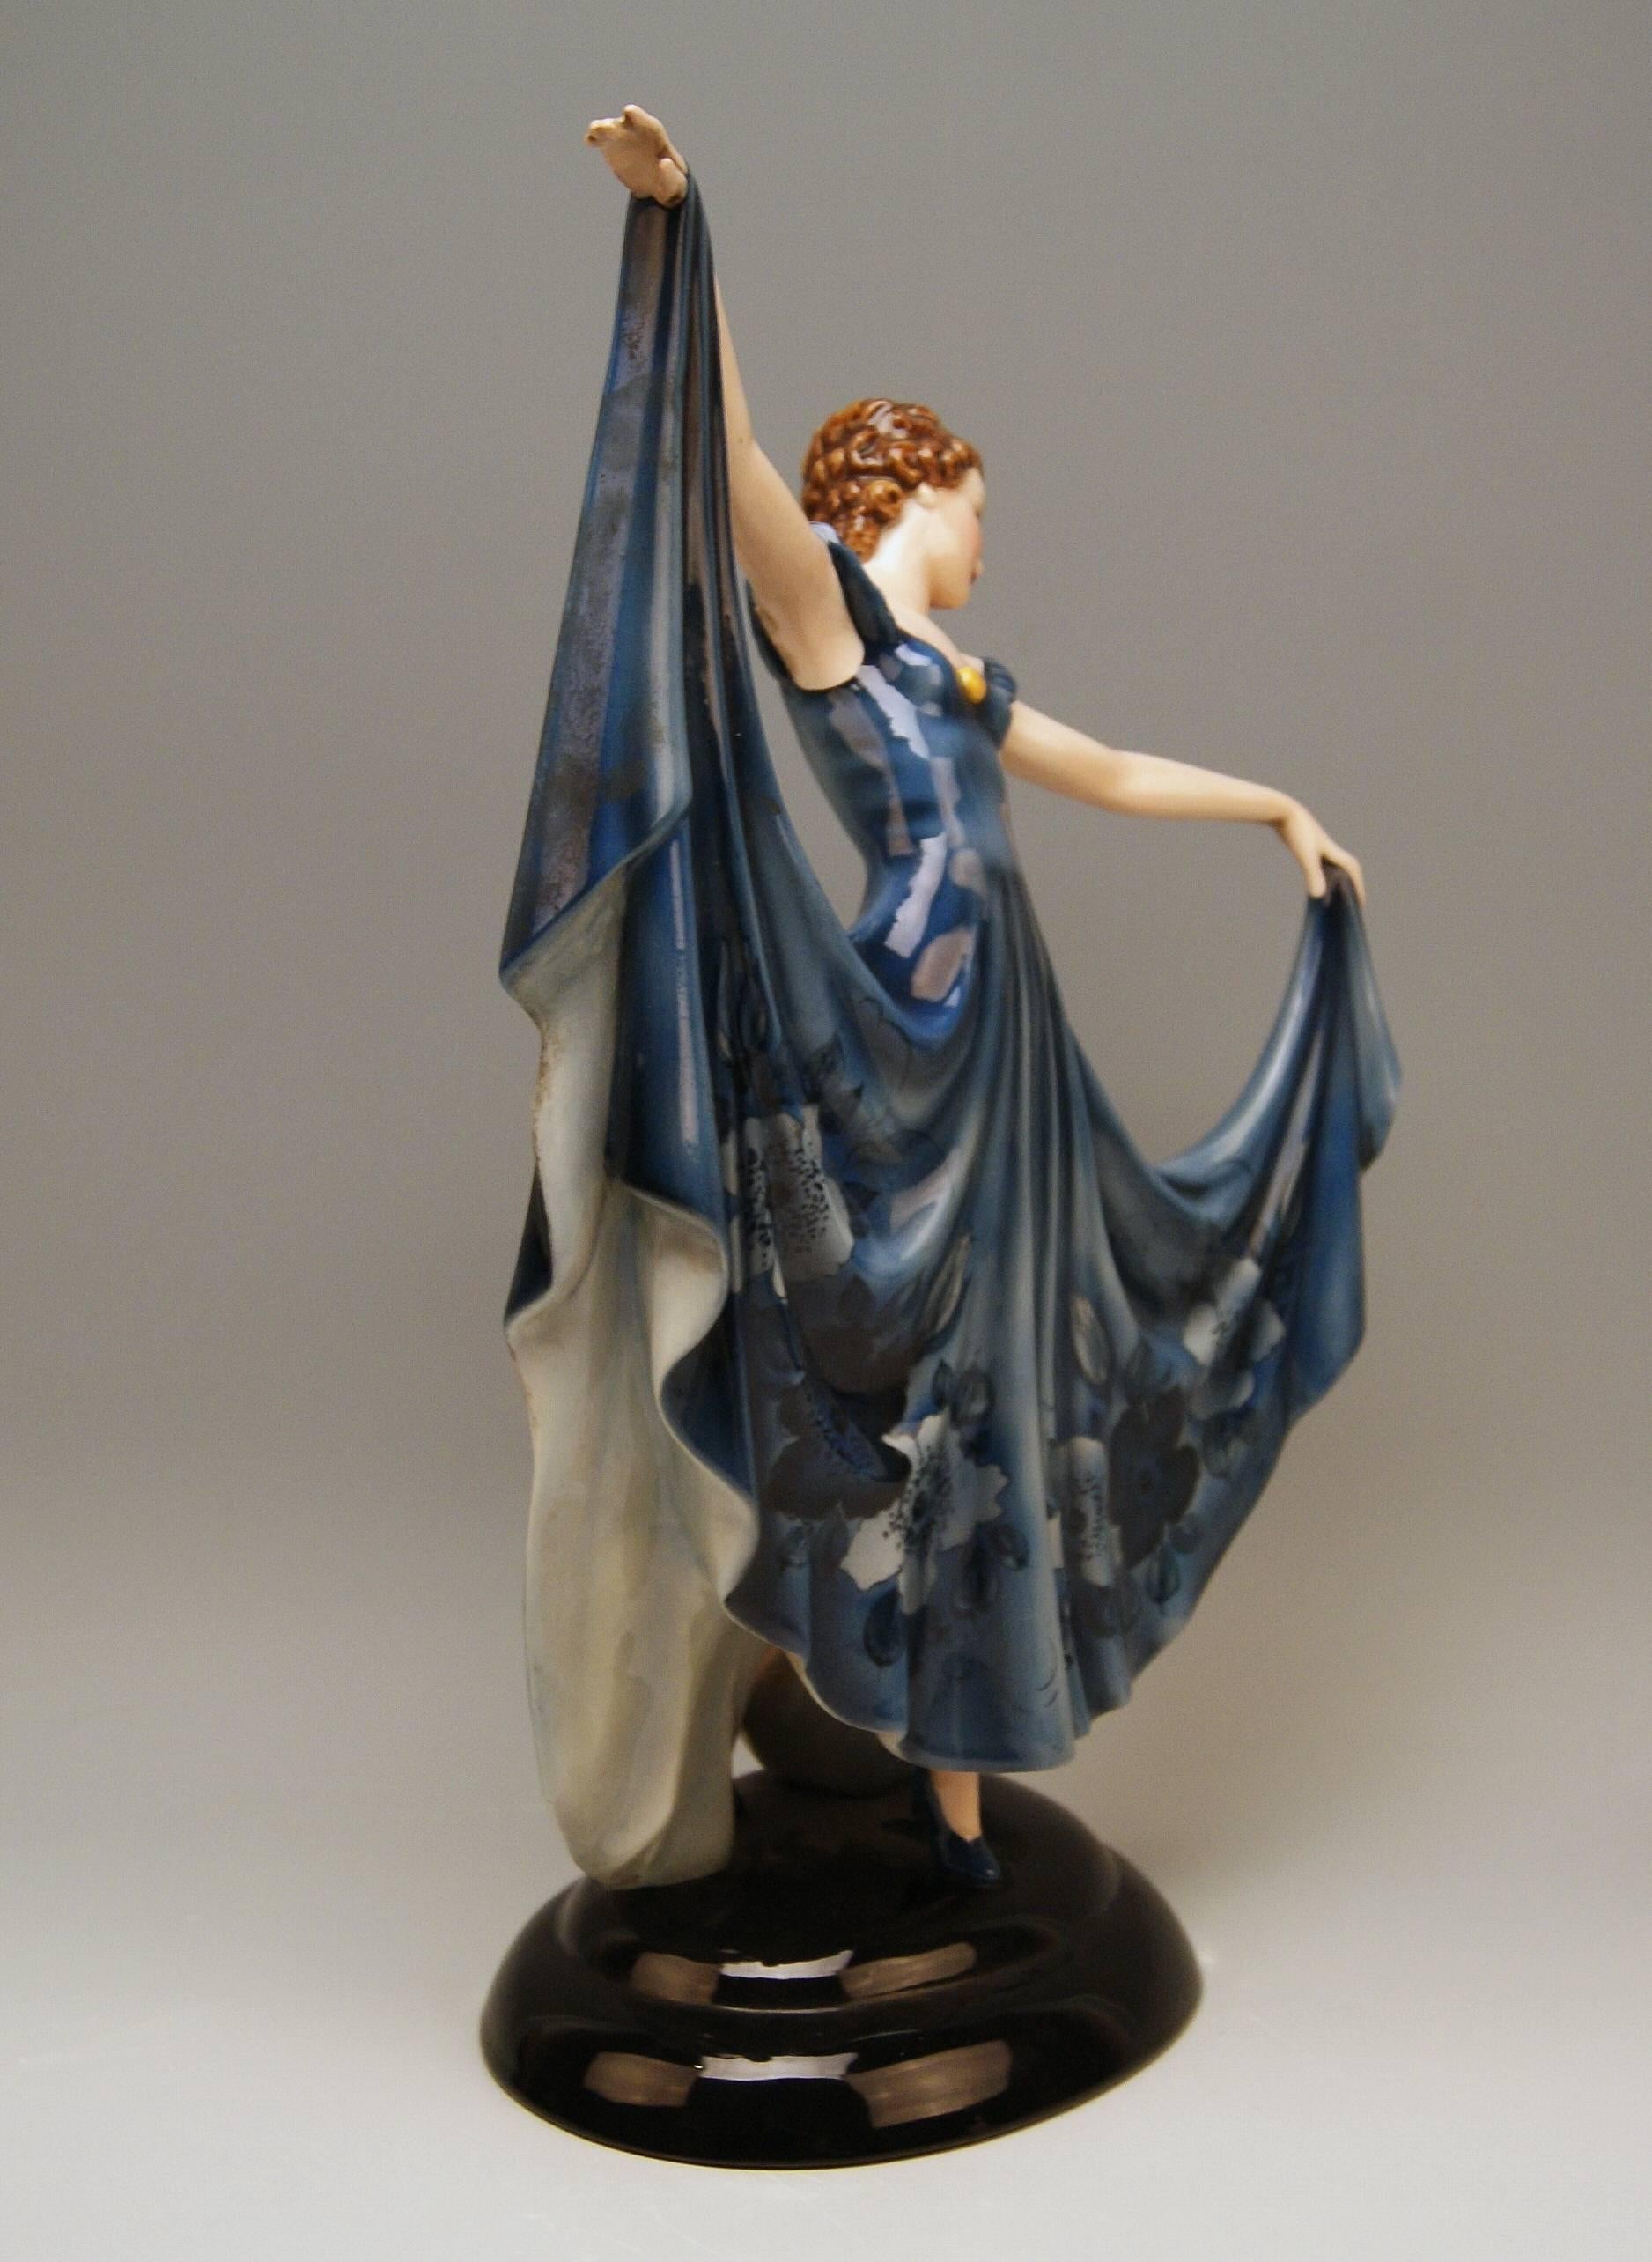 Art Deco Keramos lady dancer clad in blue dress
Designed by Stefan Dakon (1904 – 1997) / made circa 1950

Hallmarked at reverse side:
Keramos (Wien / = Vienna) / Made in Austria
stamp mark shaped as coat of arms with banderole in which letters